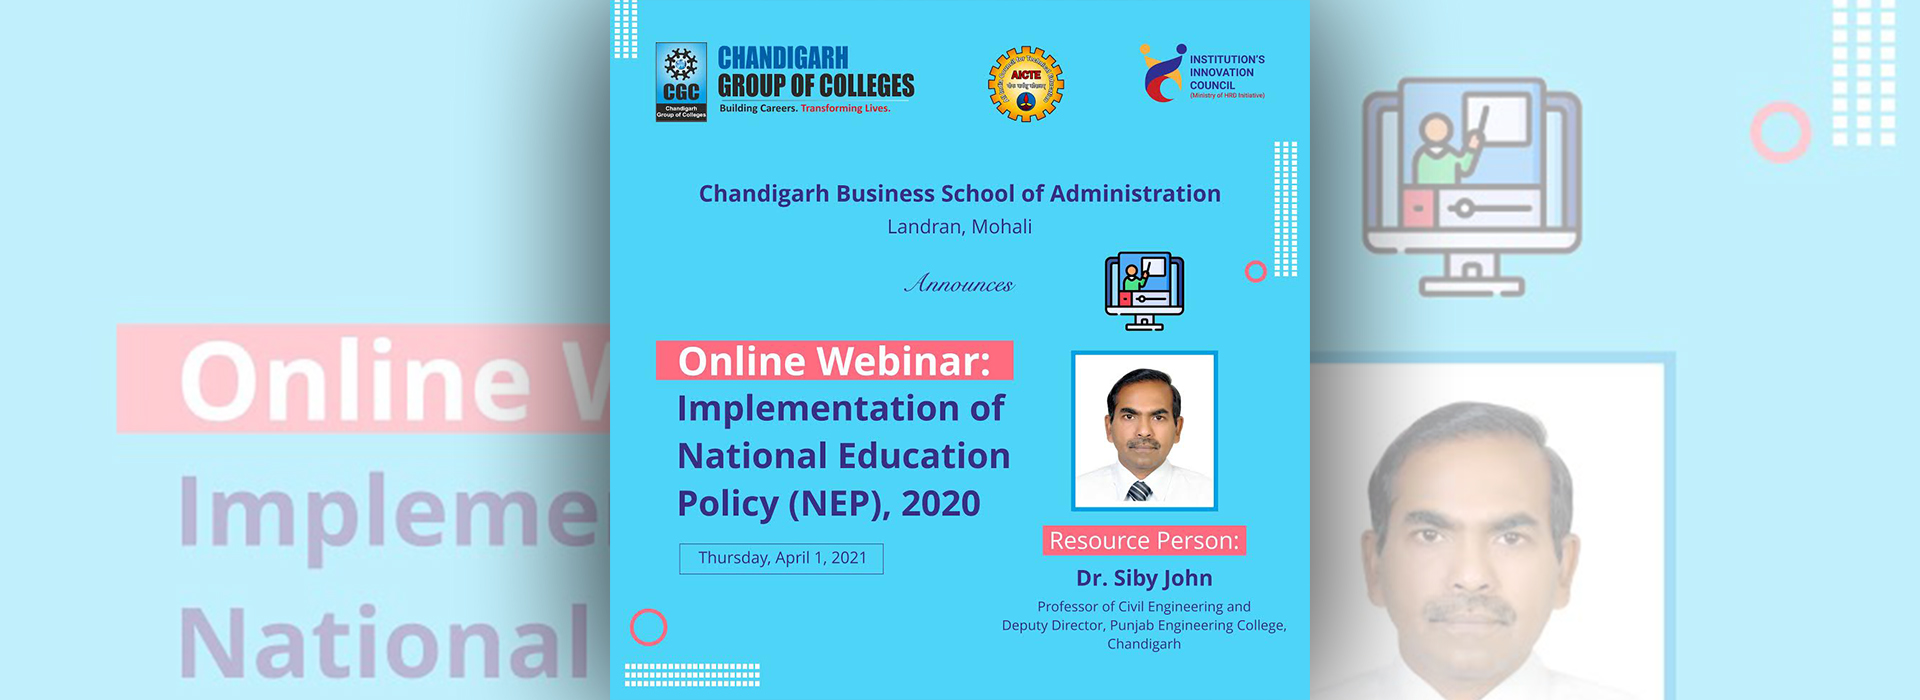 Online Webinar on “Implementation of National Education Policy (NEP) 